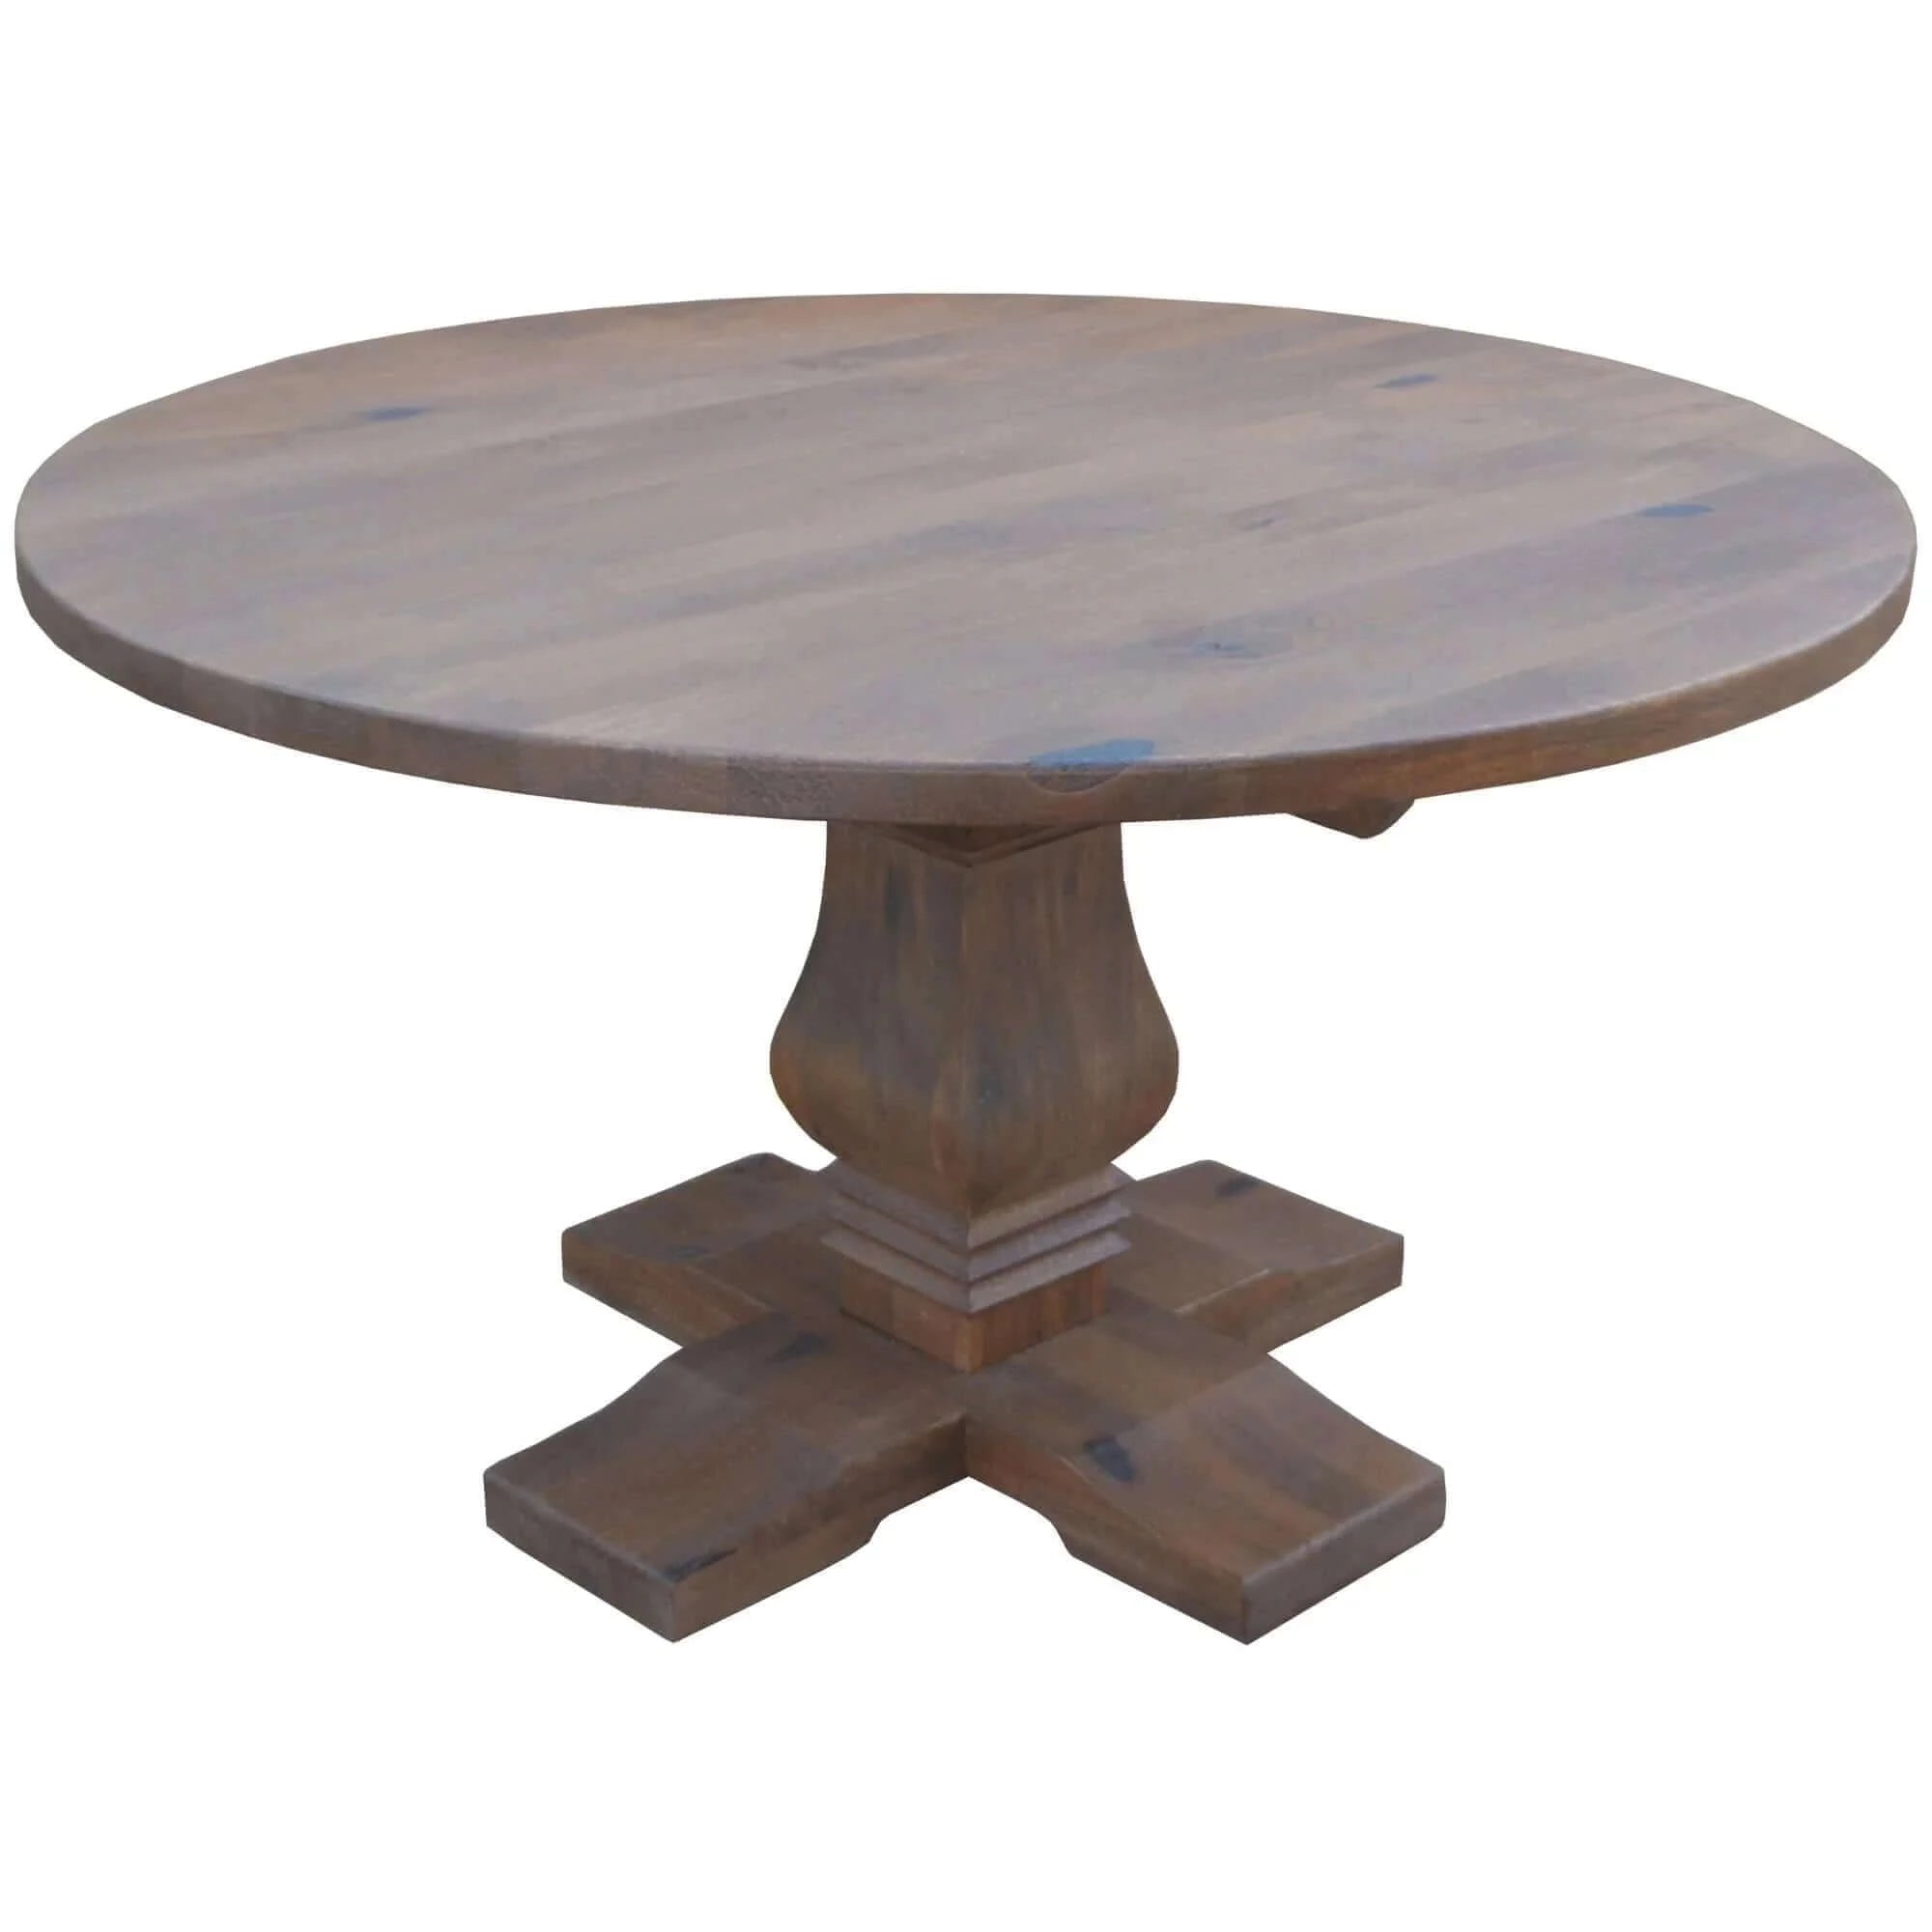 Buy florence round dining table 135cm french provincial pedestal solid timber wood - upinteriors-Upinteriors